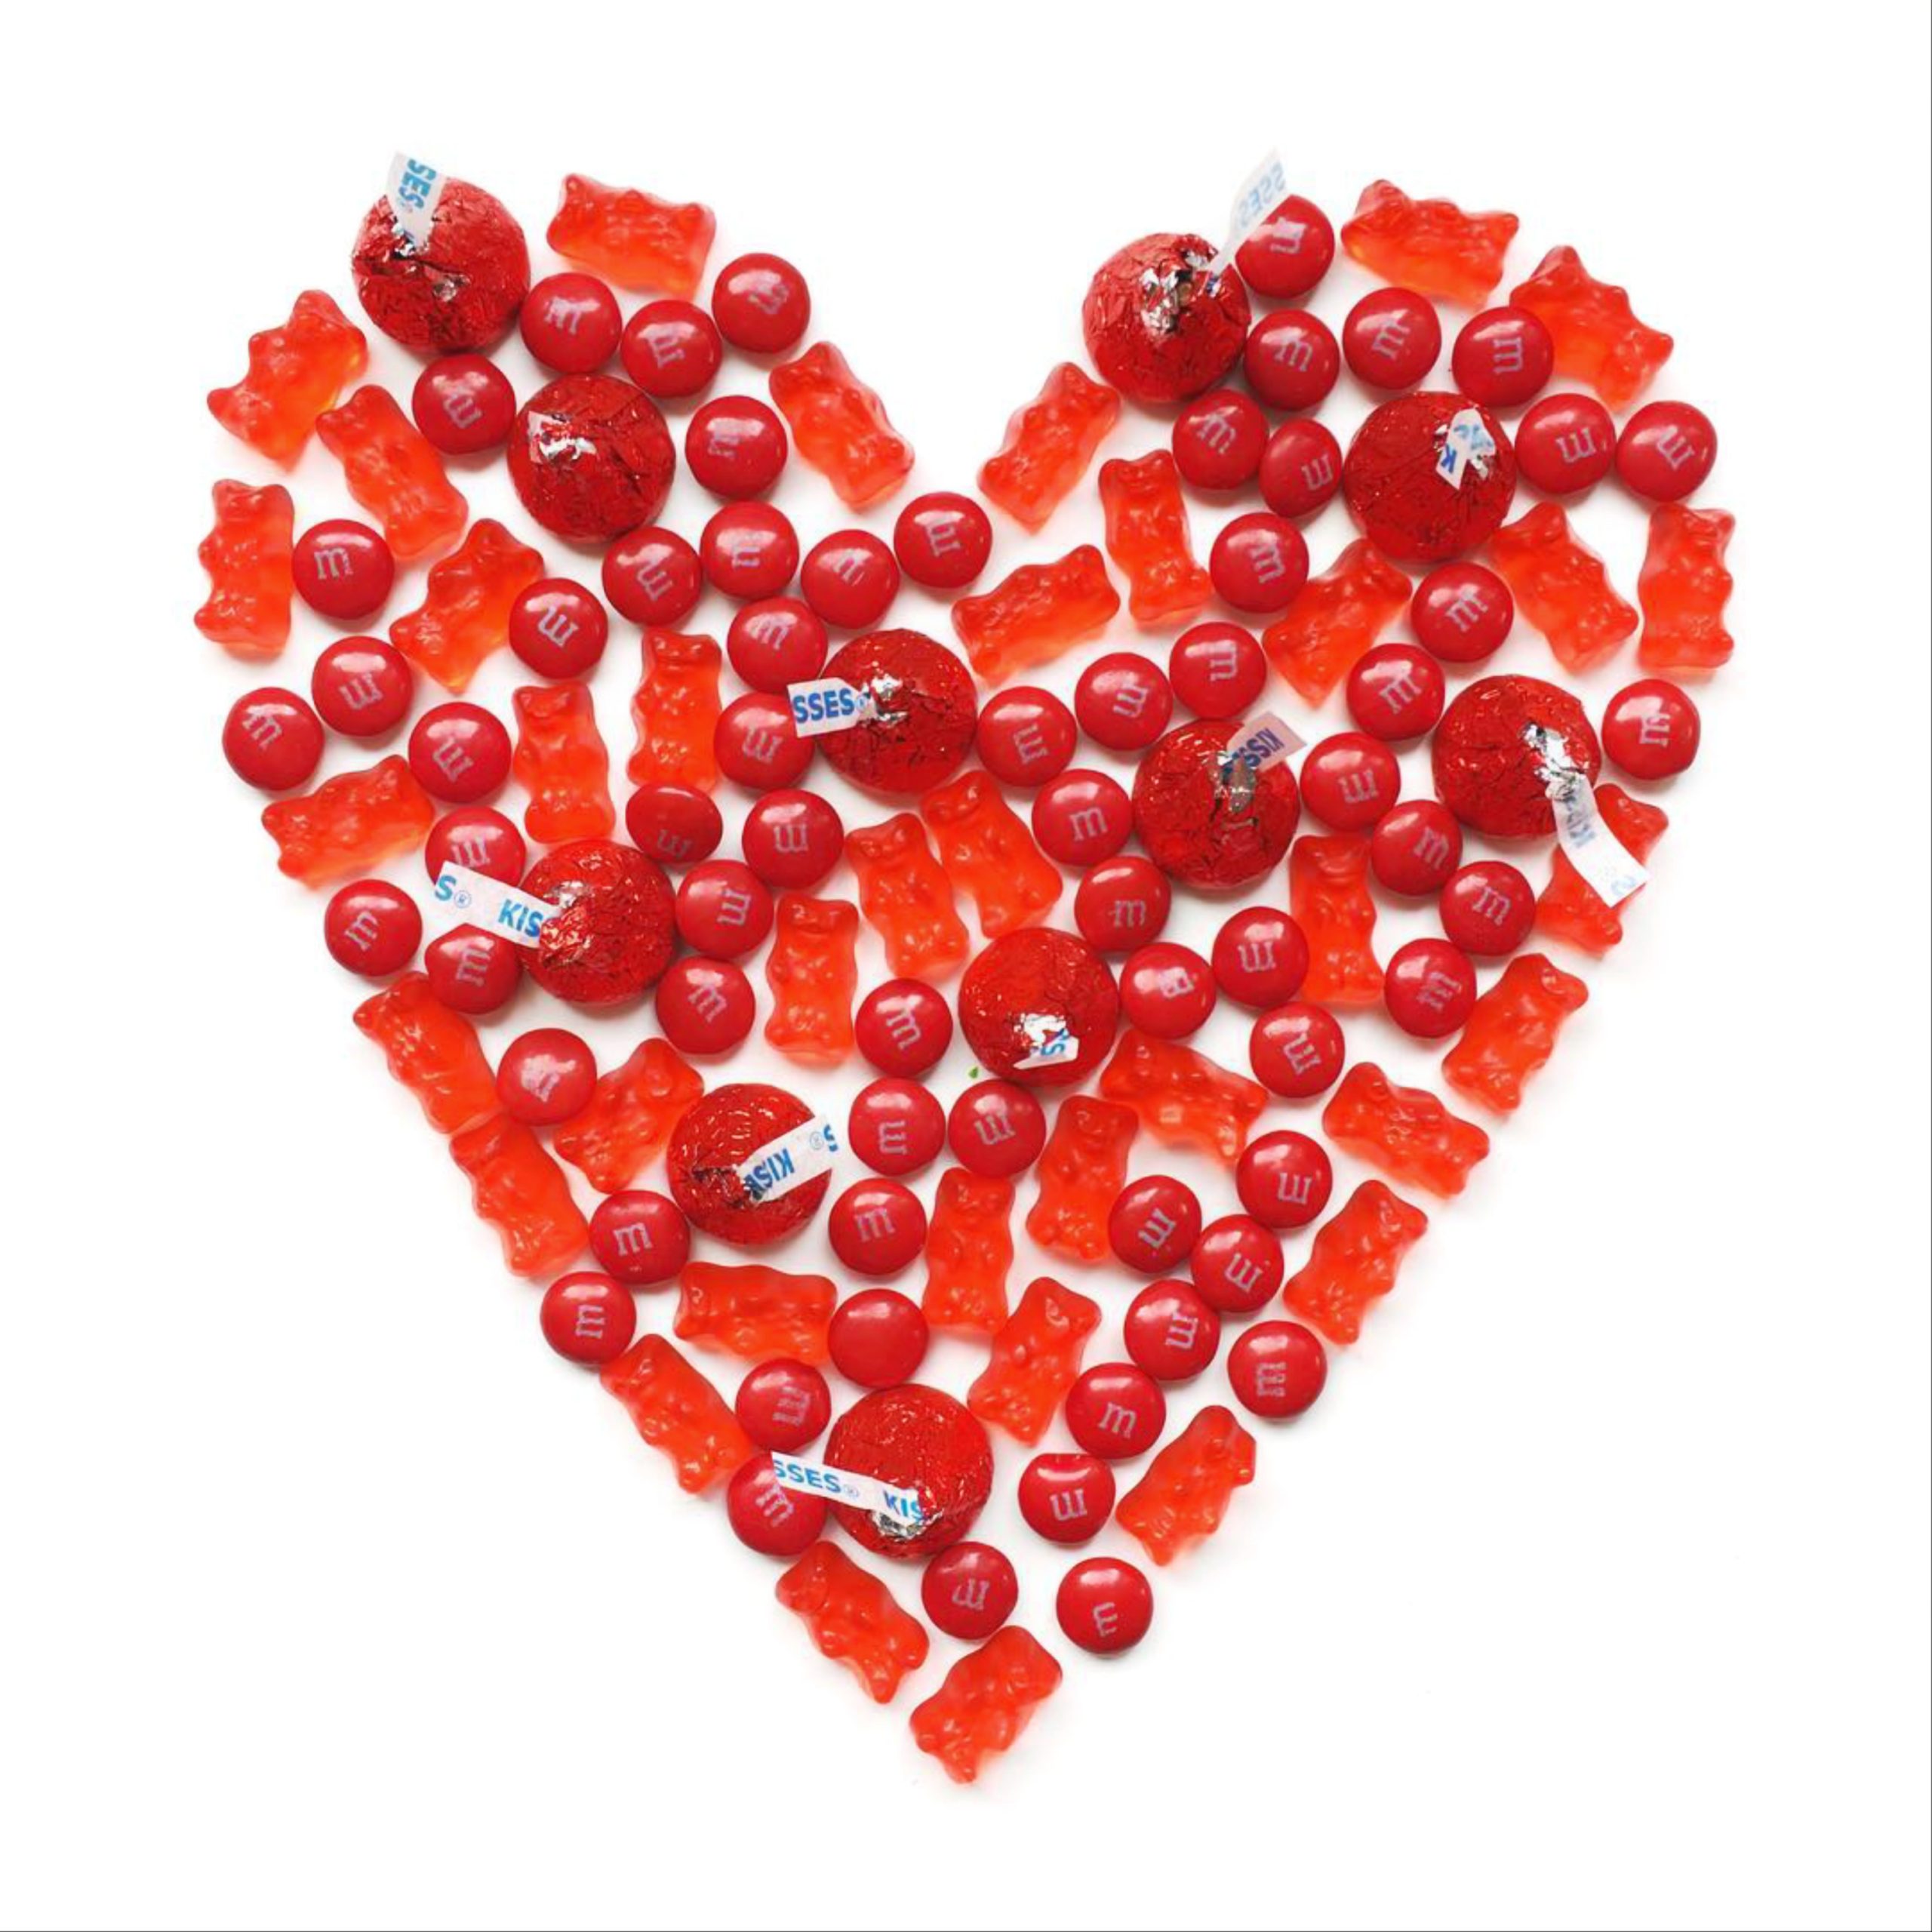 A heart shape made with red candies